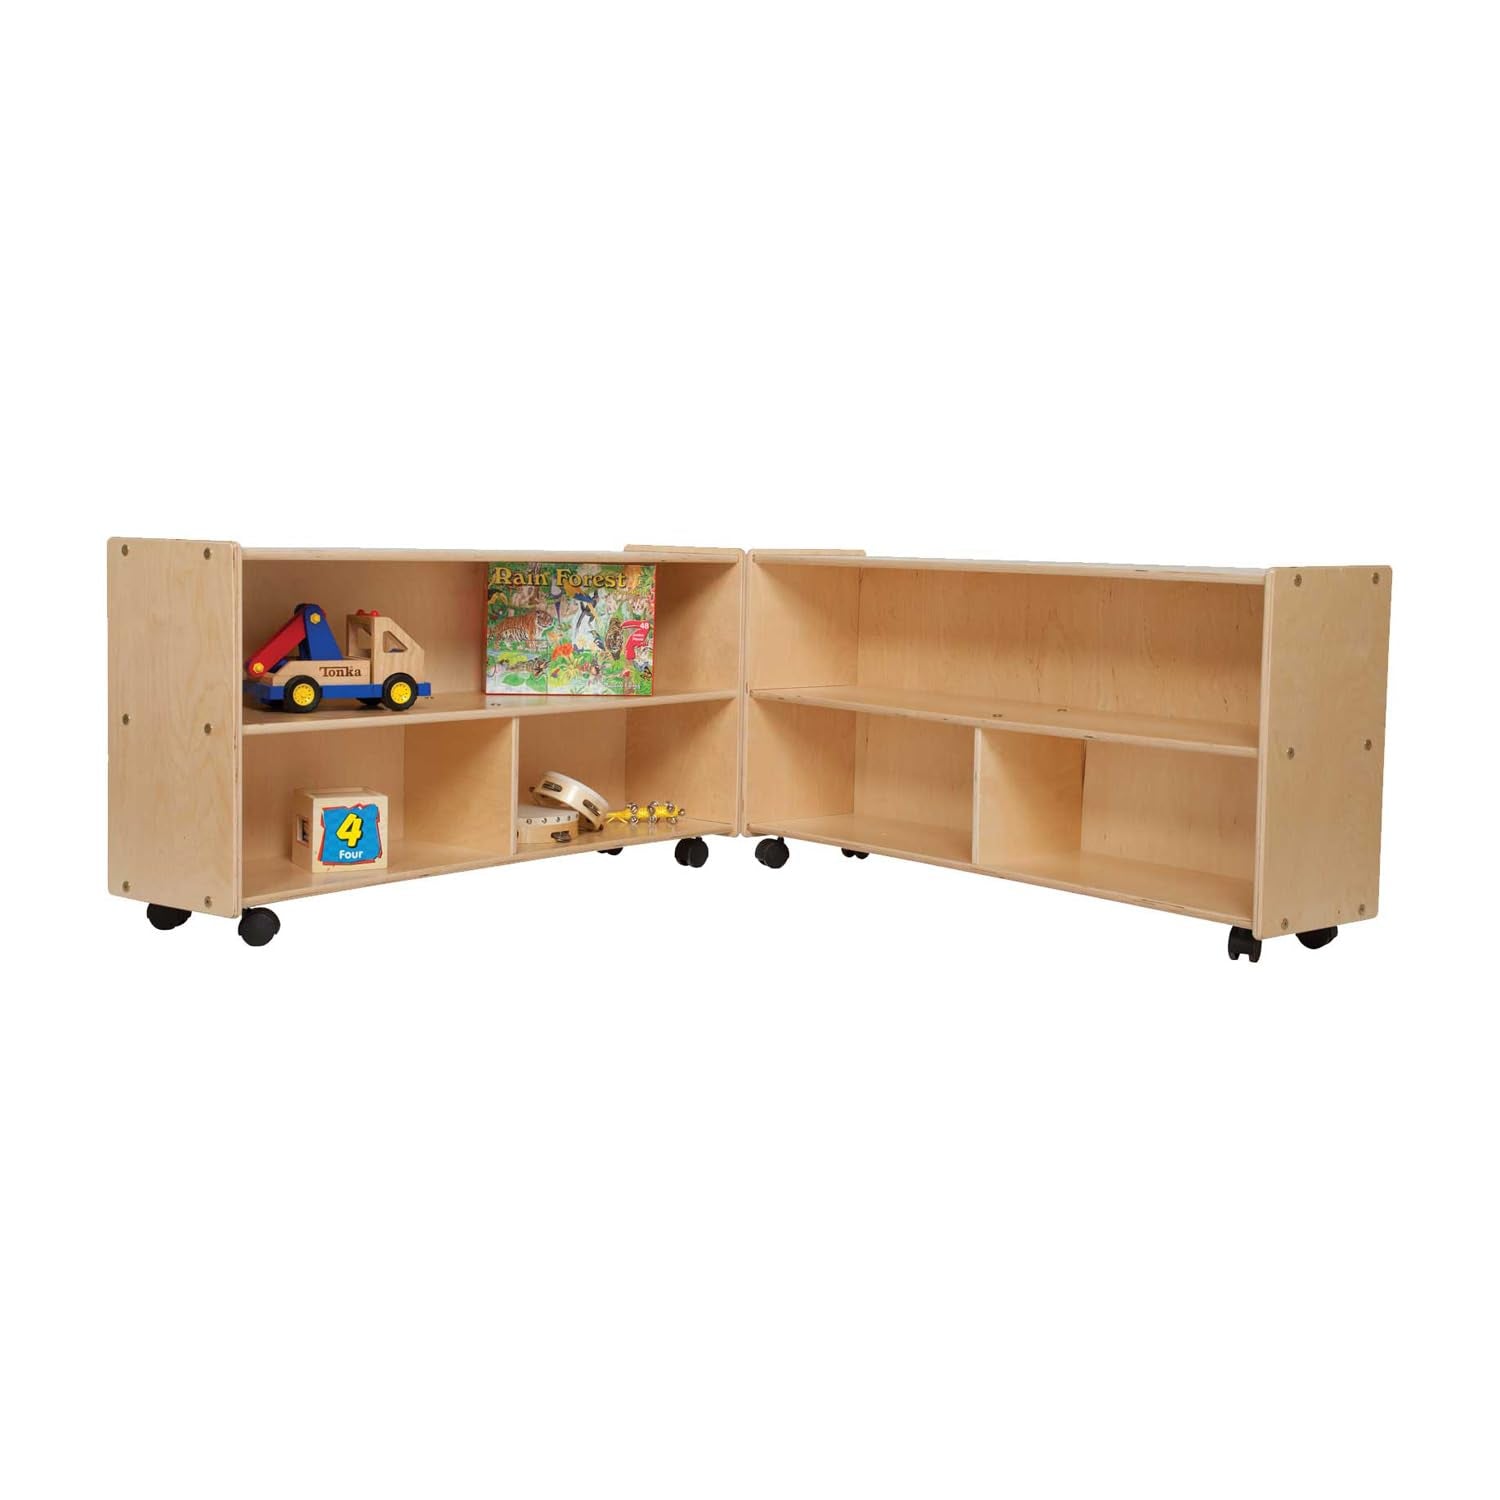 Classroom Storage Cabinet with Casters, Wooden Kids Bookcase, Toy Organizer, Arts, Crafts & Supplies Storage Unit, Natural, [Fully Assembled]